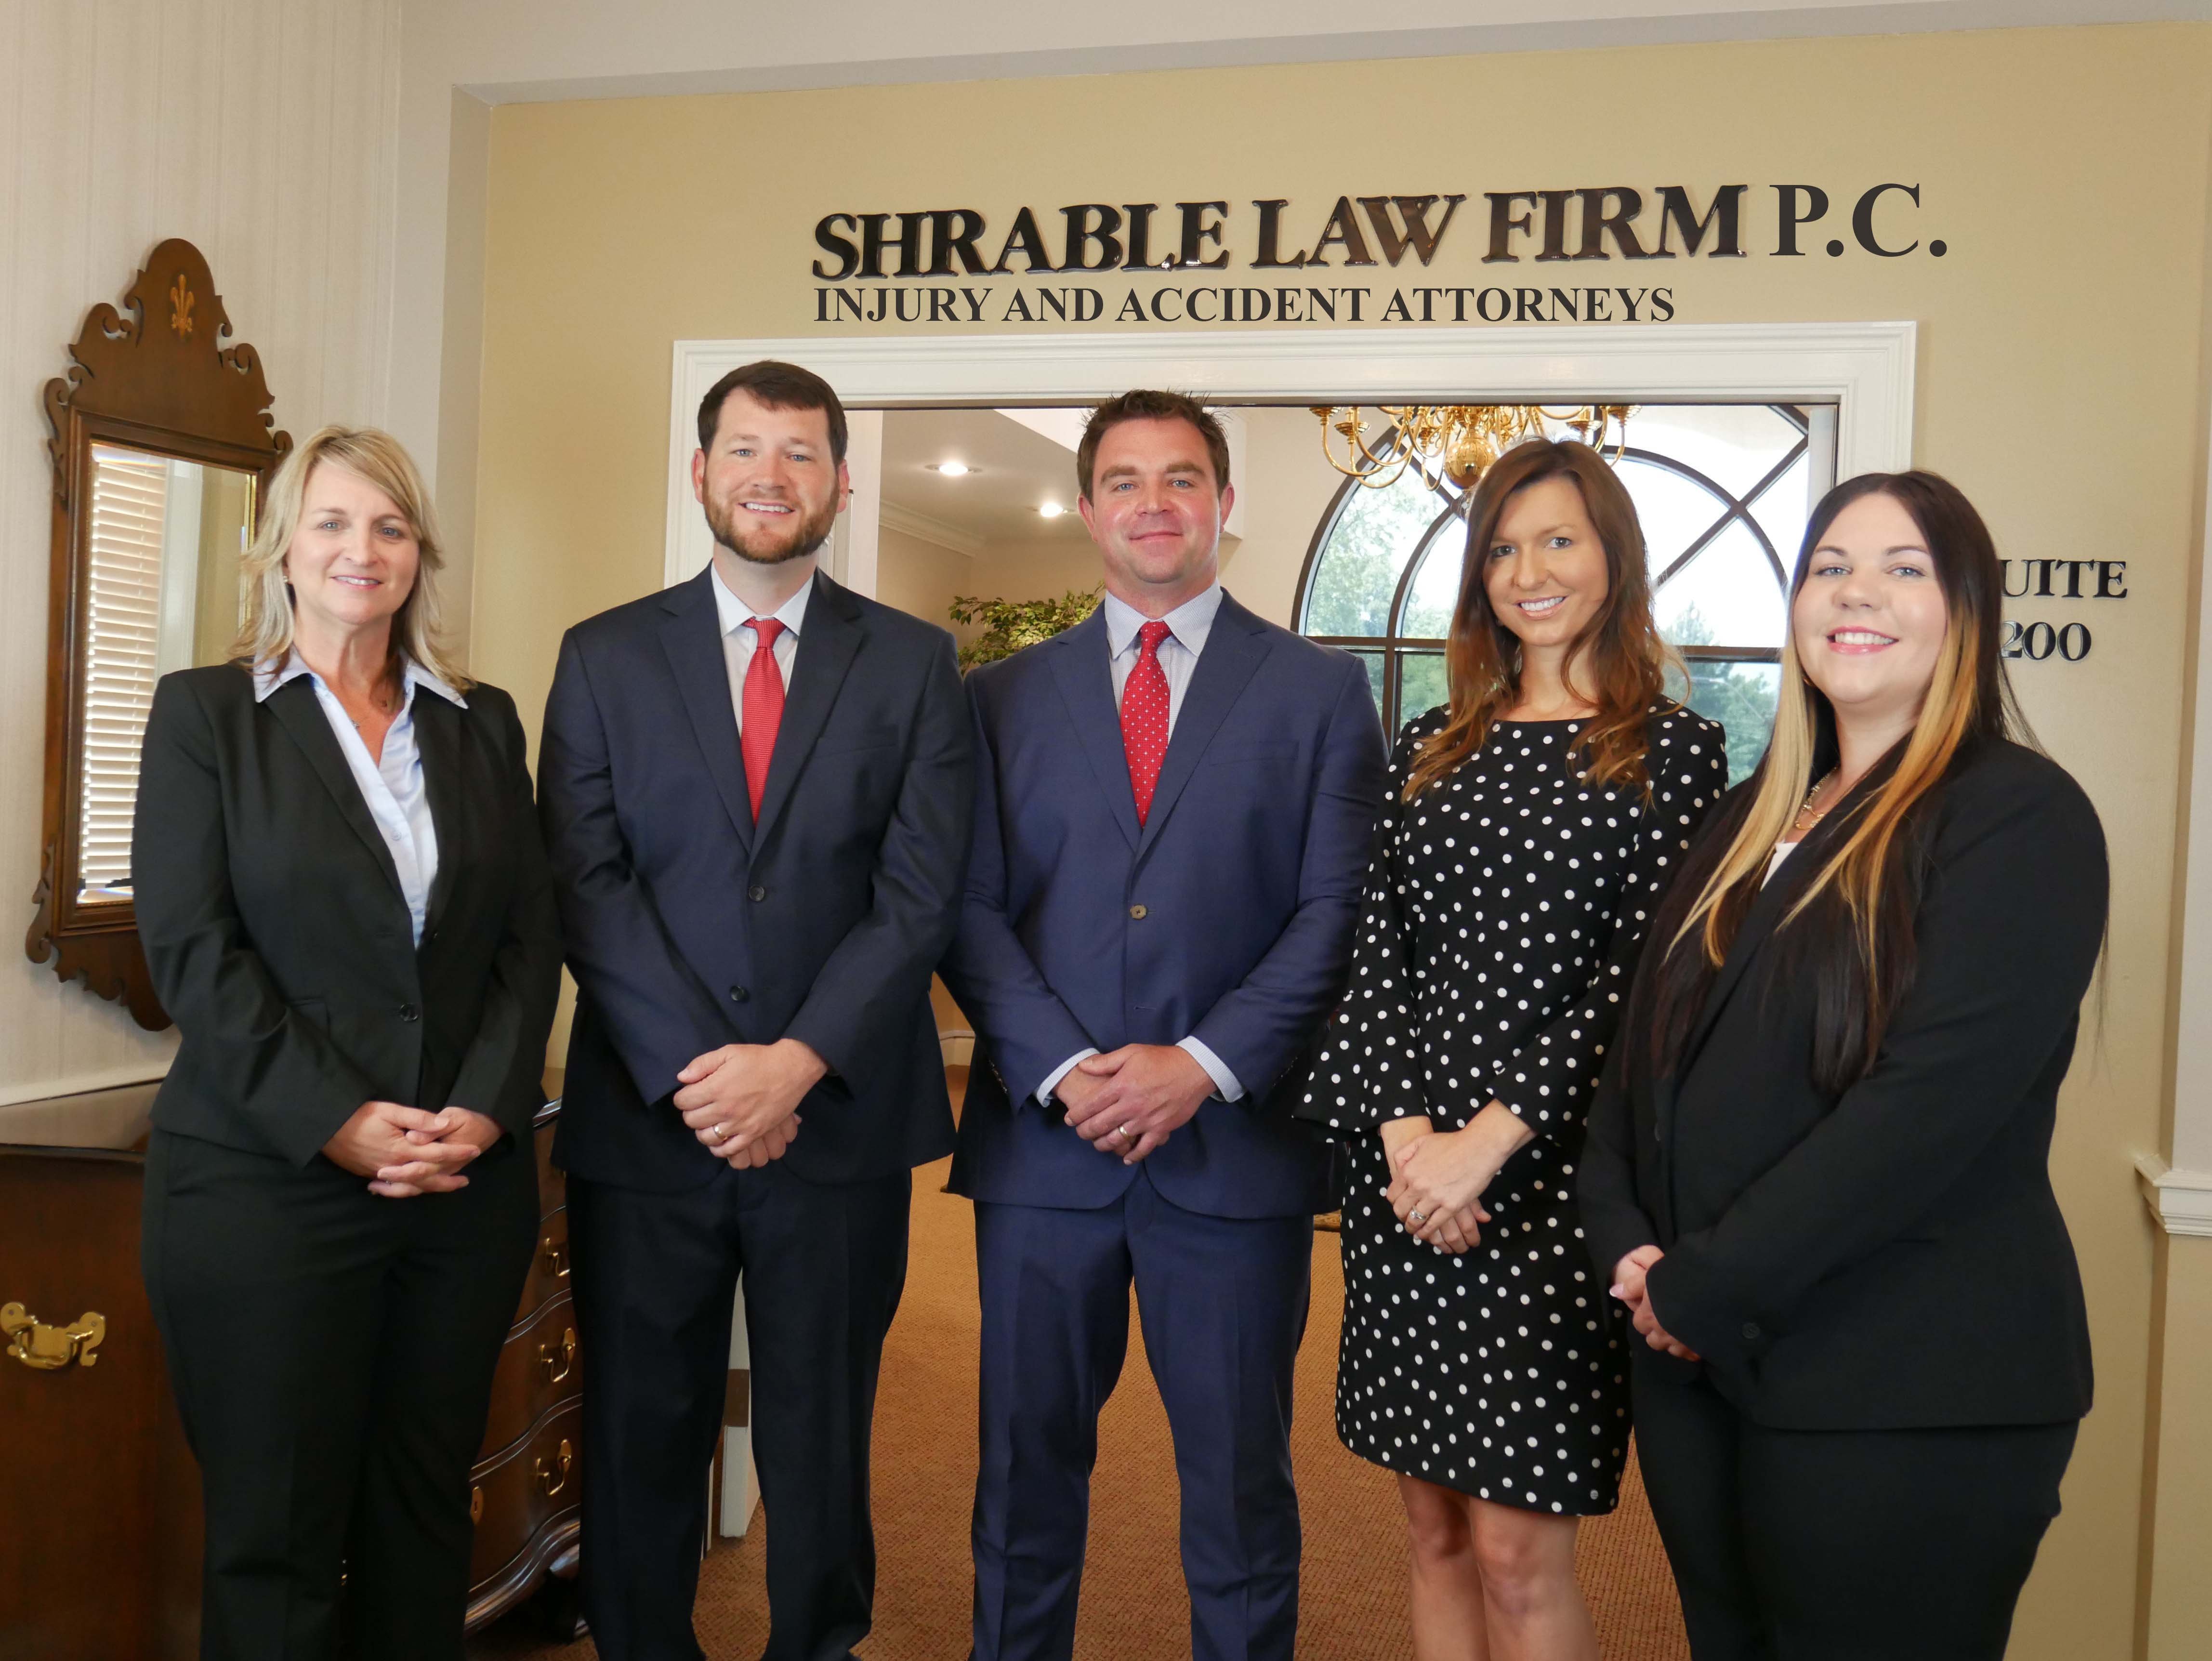 The Shrable Law Firm, P.C. Injury and Accident Attorneys cover